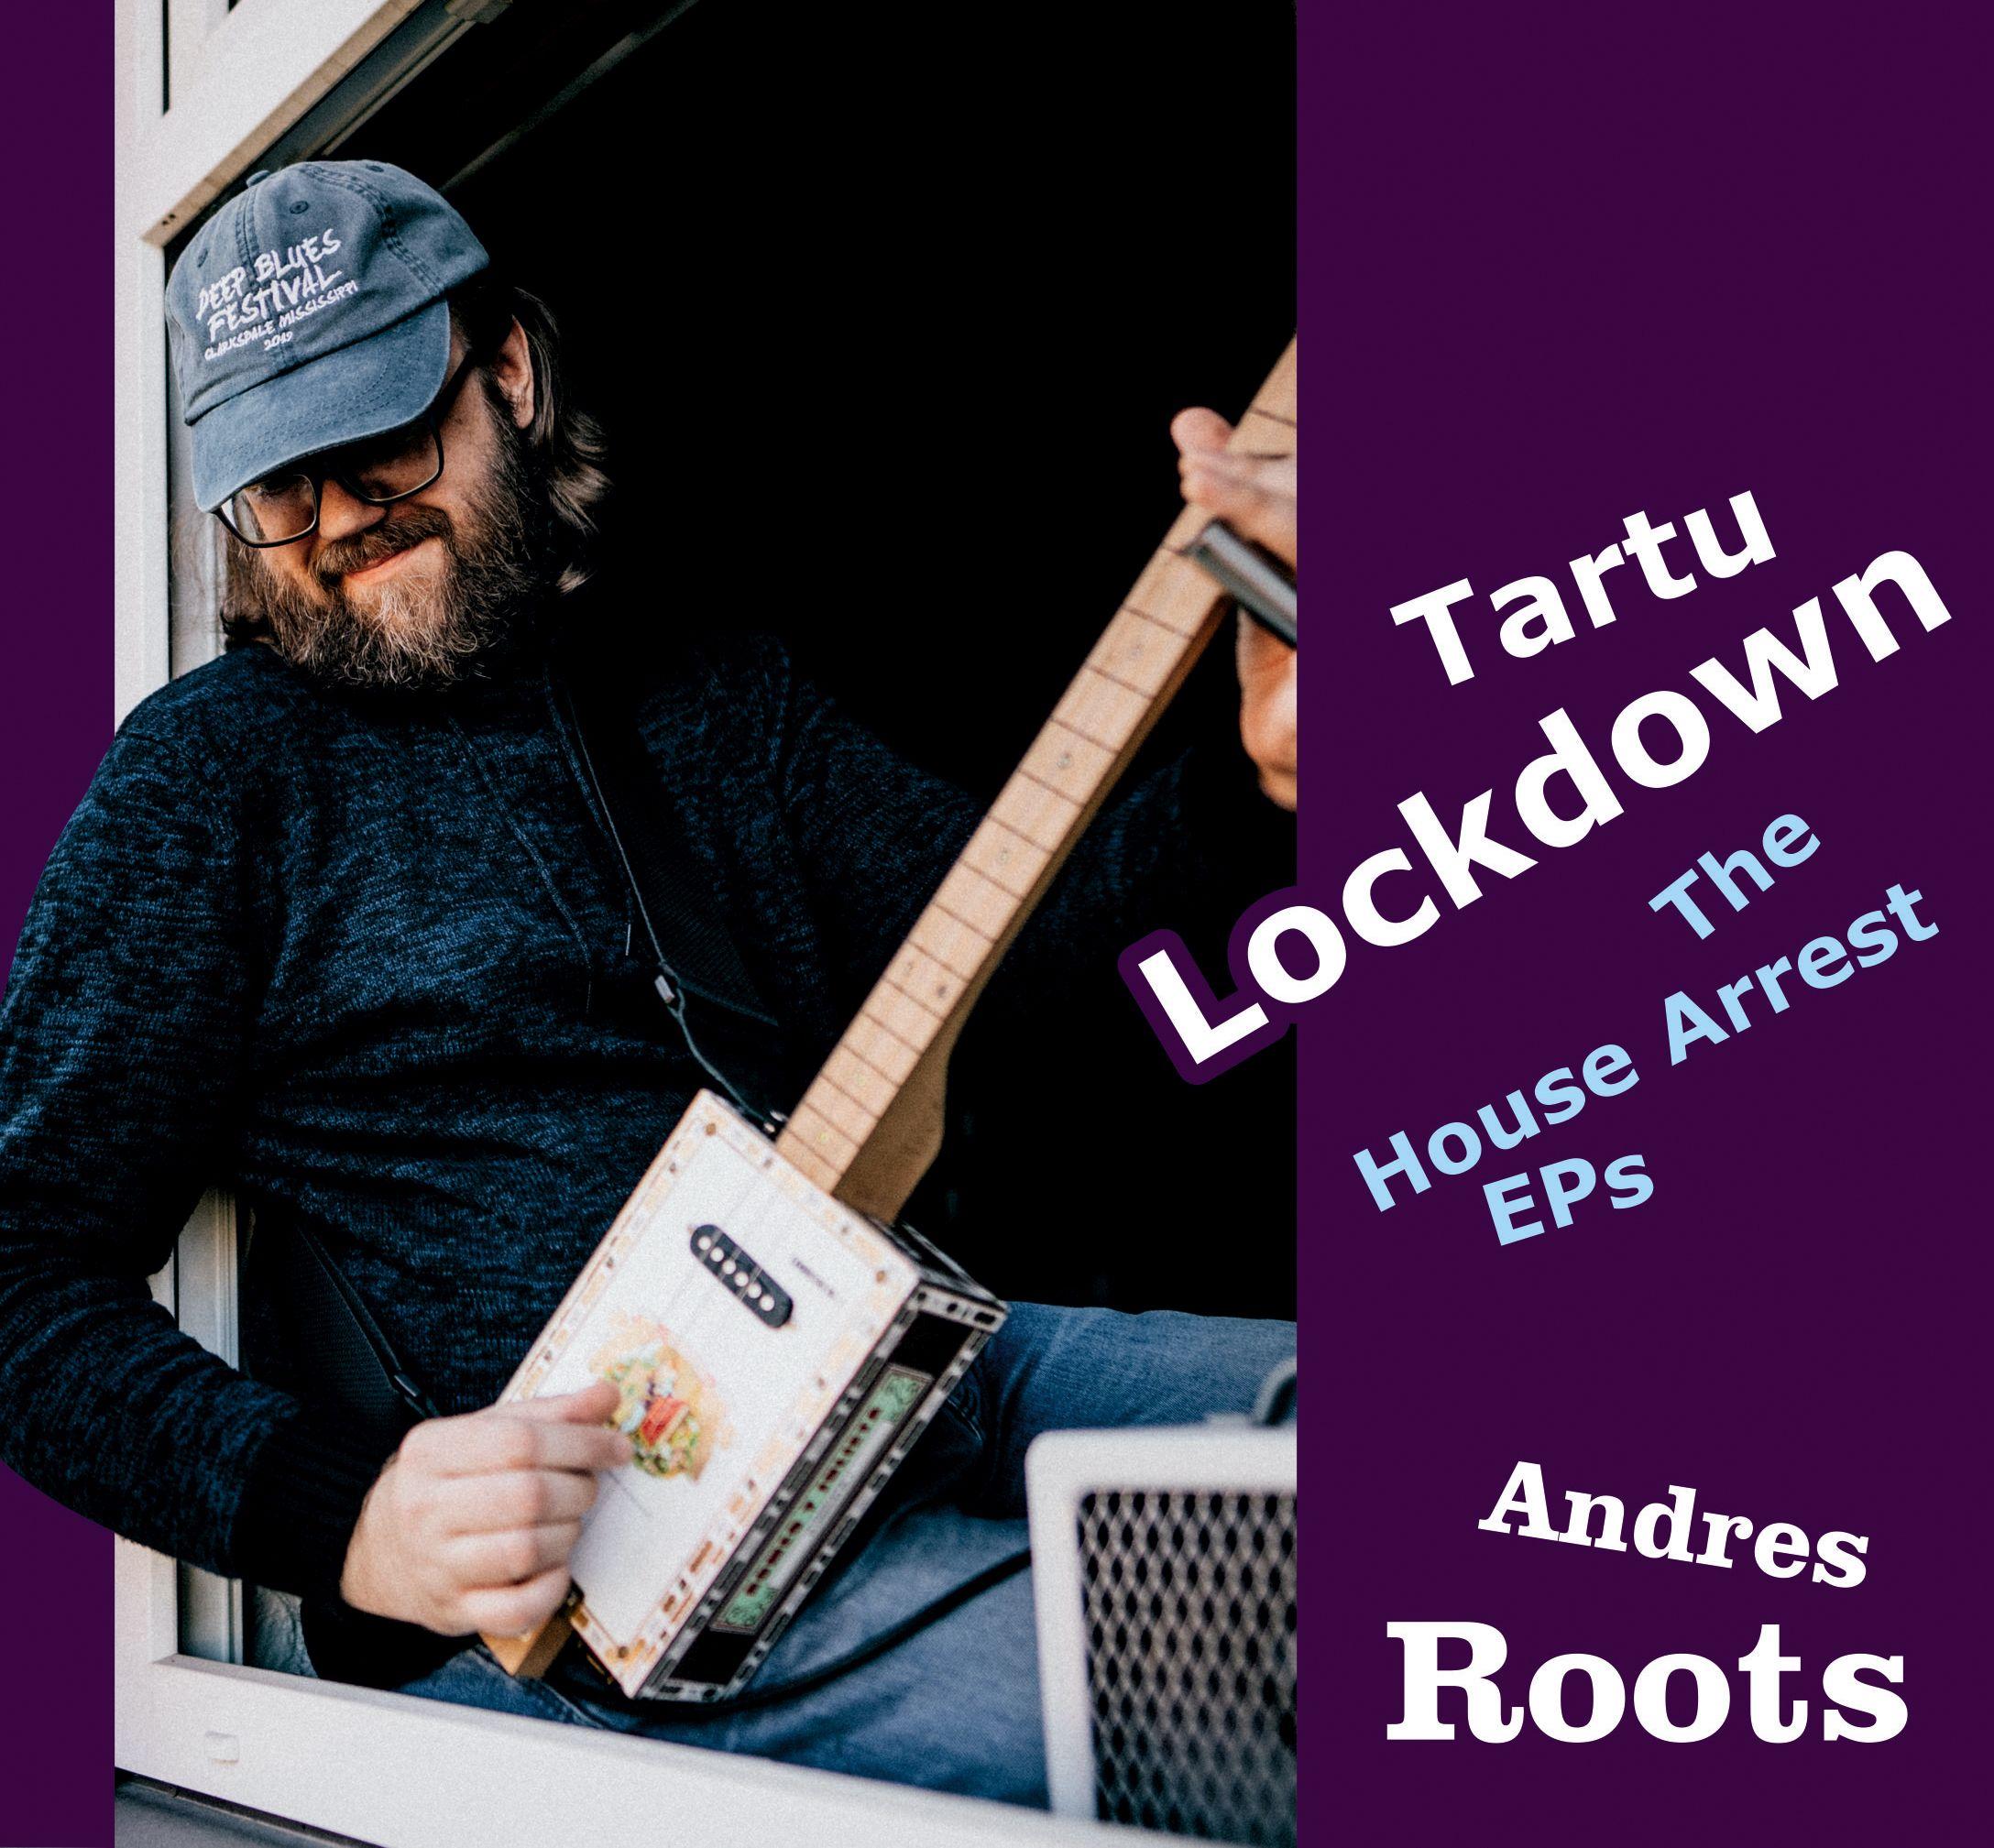 ANDRES ROOTS - TARTU LOCKDOWN: THE HOUSE ARREST EPS (2020) CD